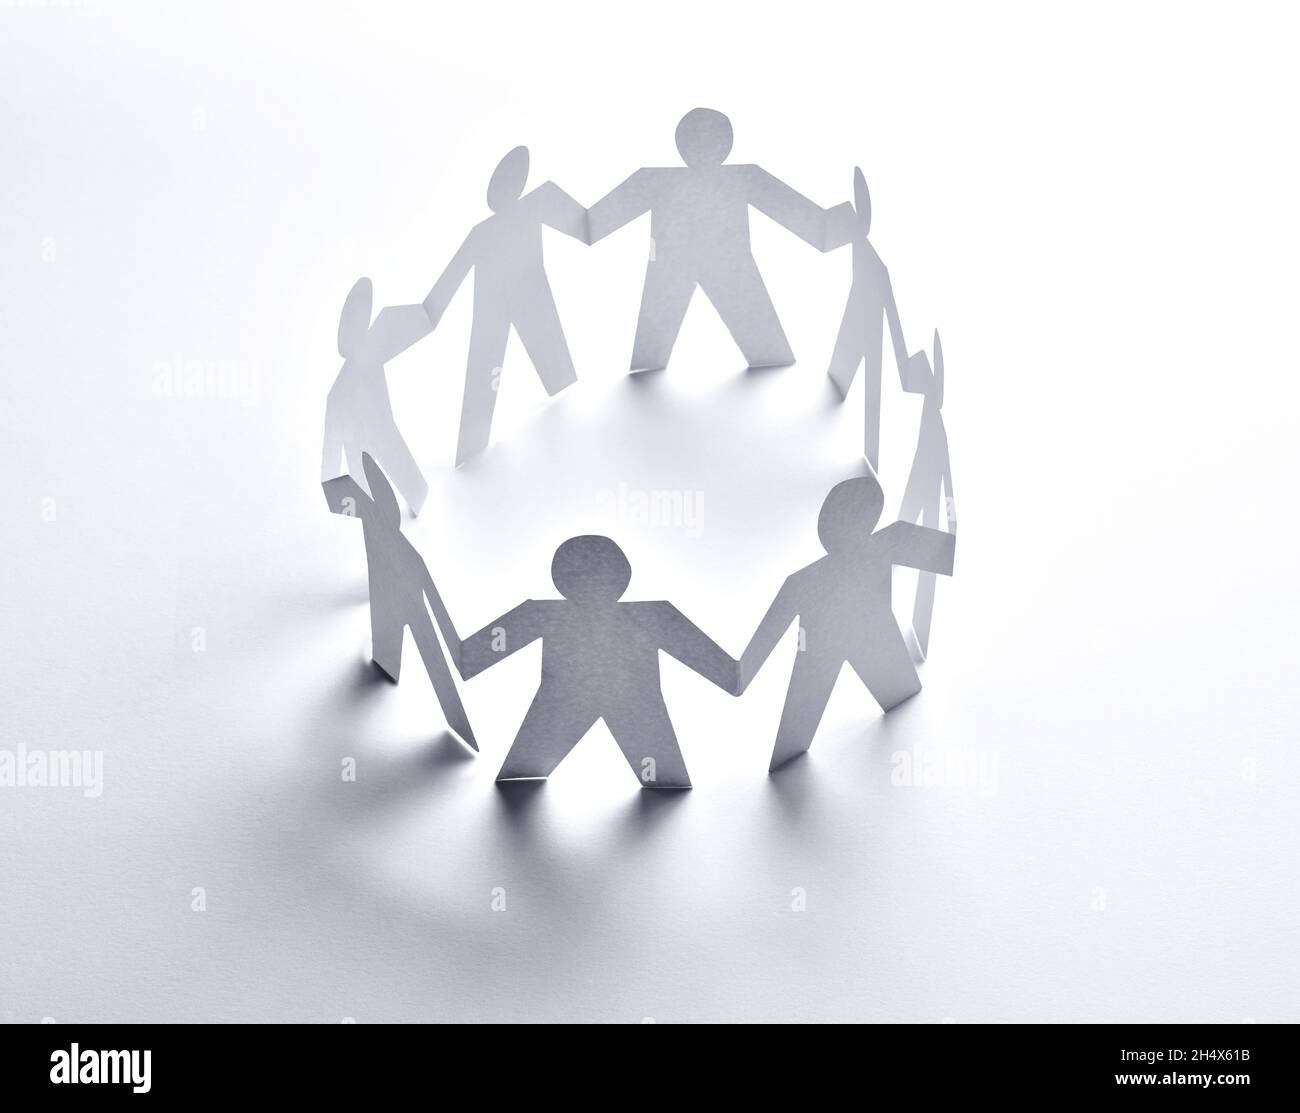 paper people community unity togetherness Stock Photo